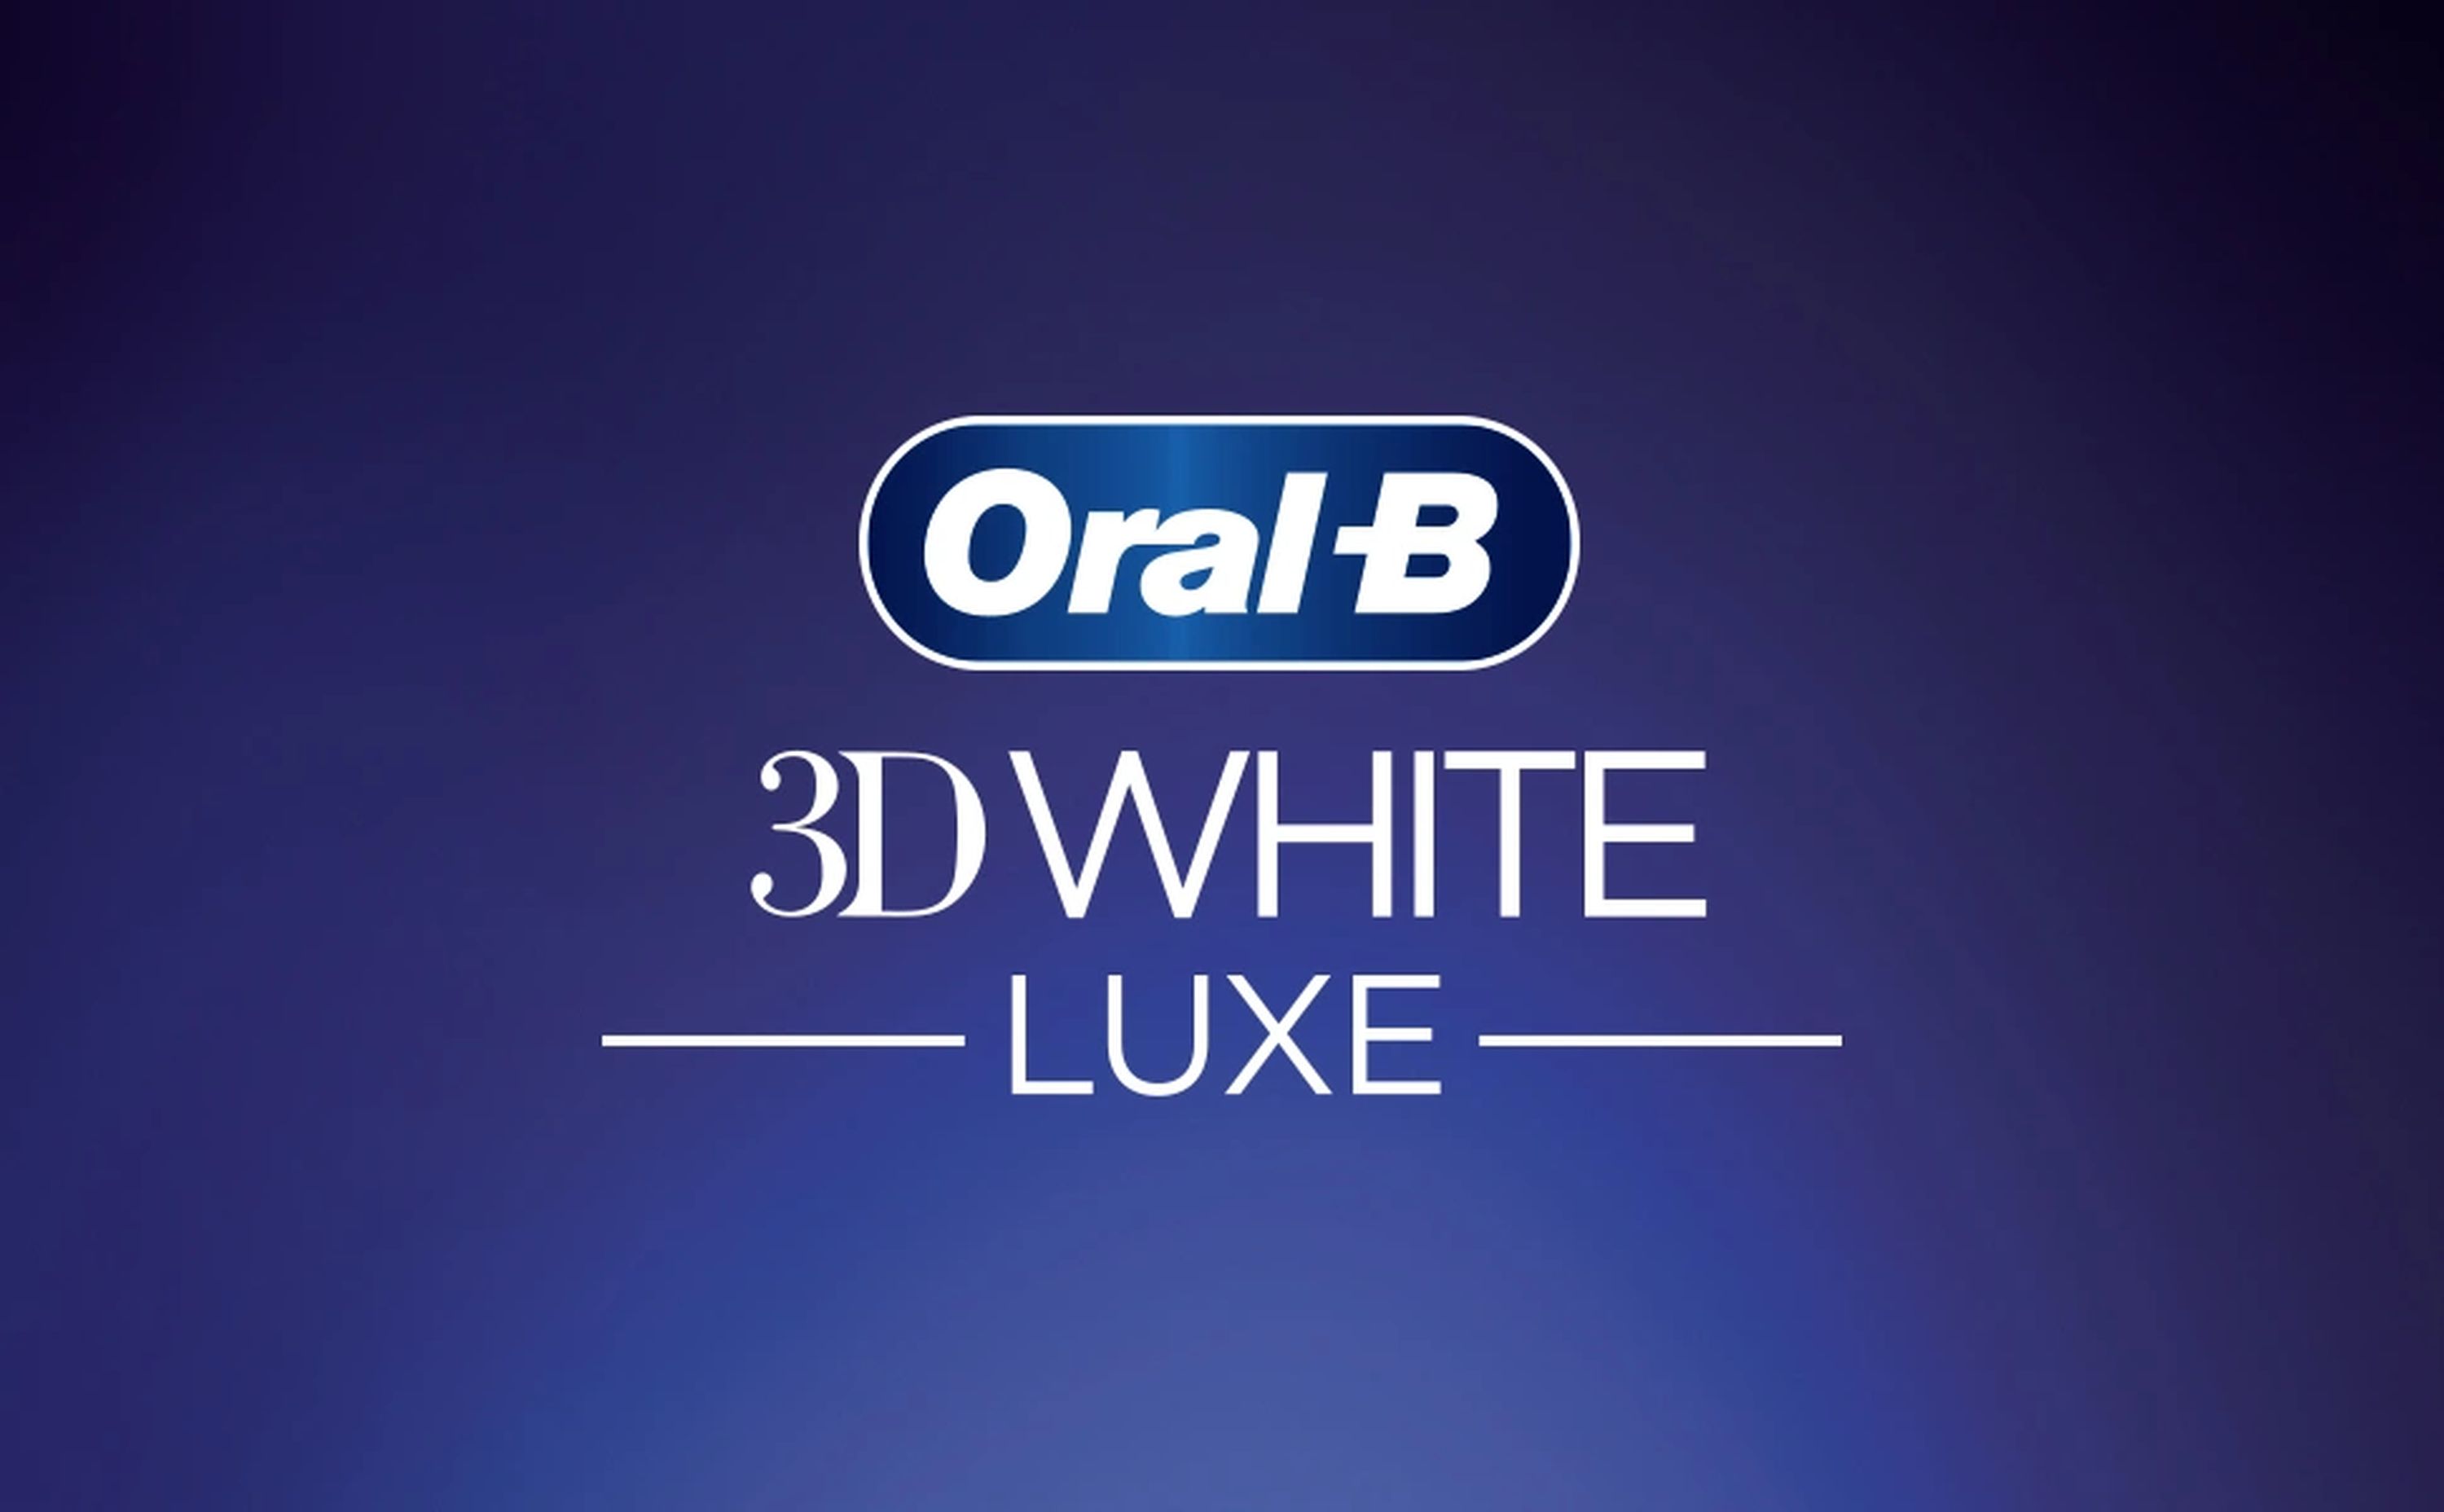 Oral B 3D White Luxe.